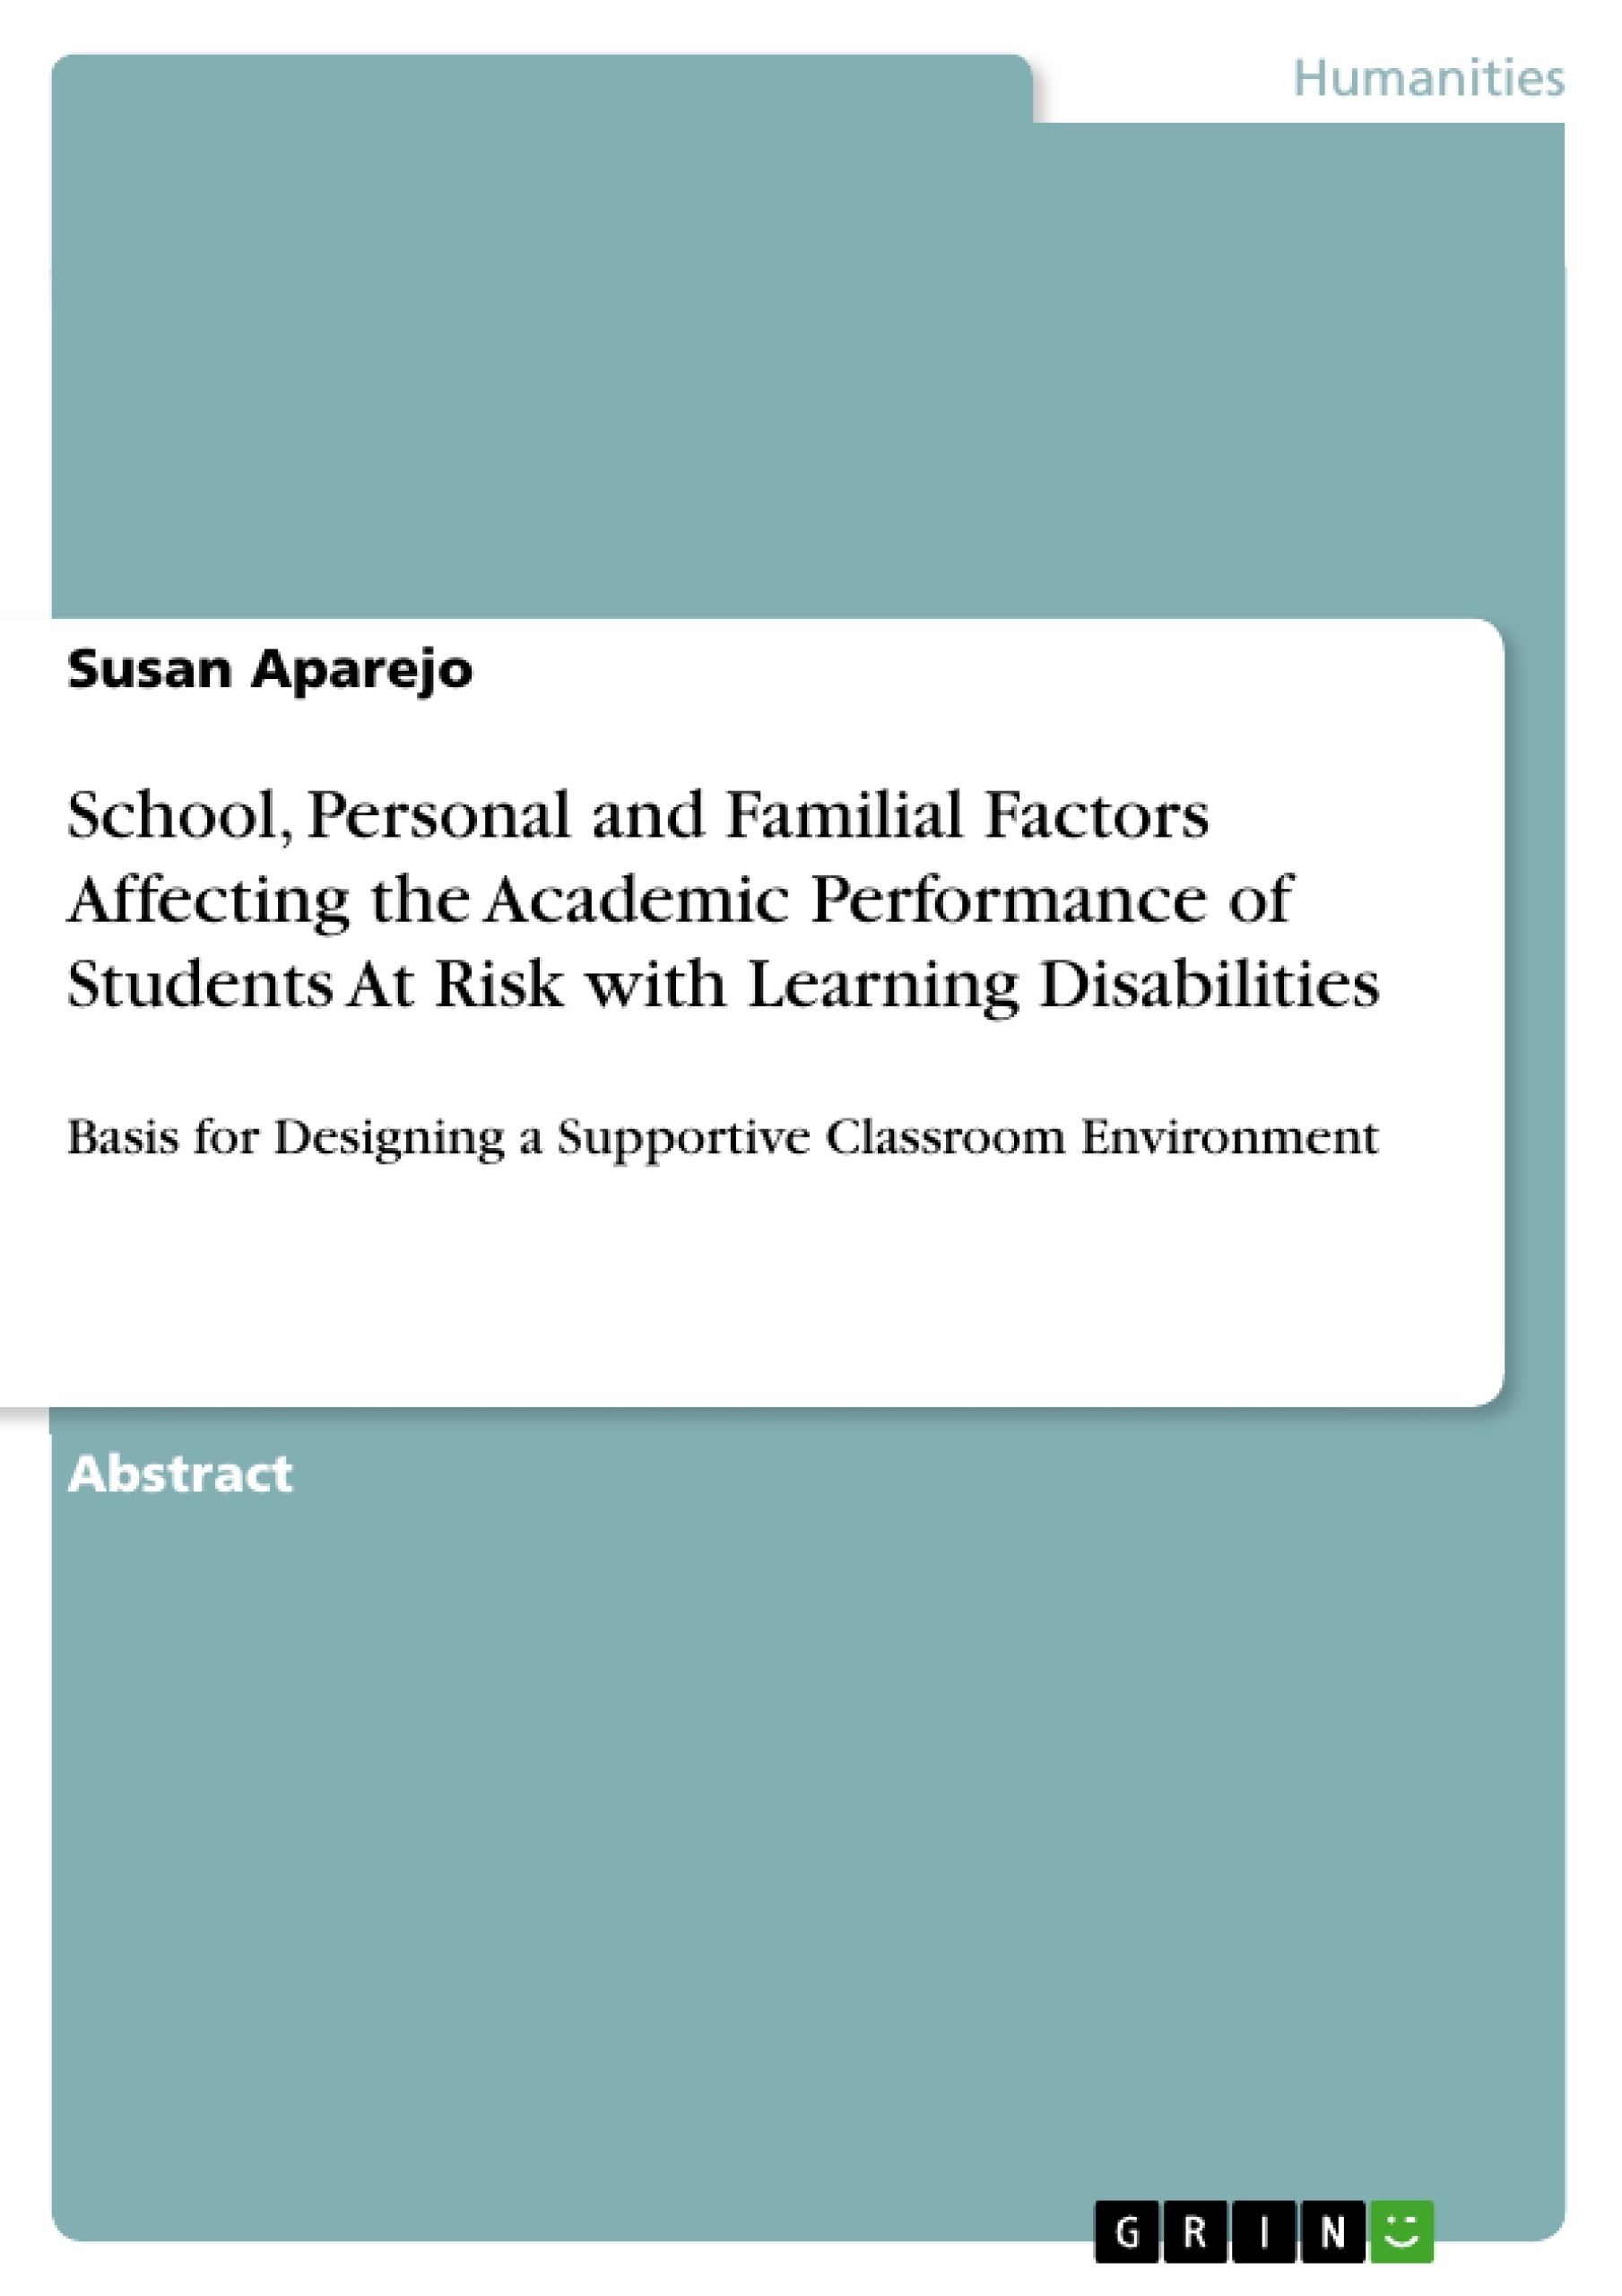 What are some factors affecting students' academic performance?